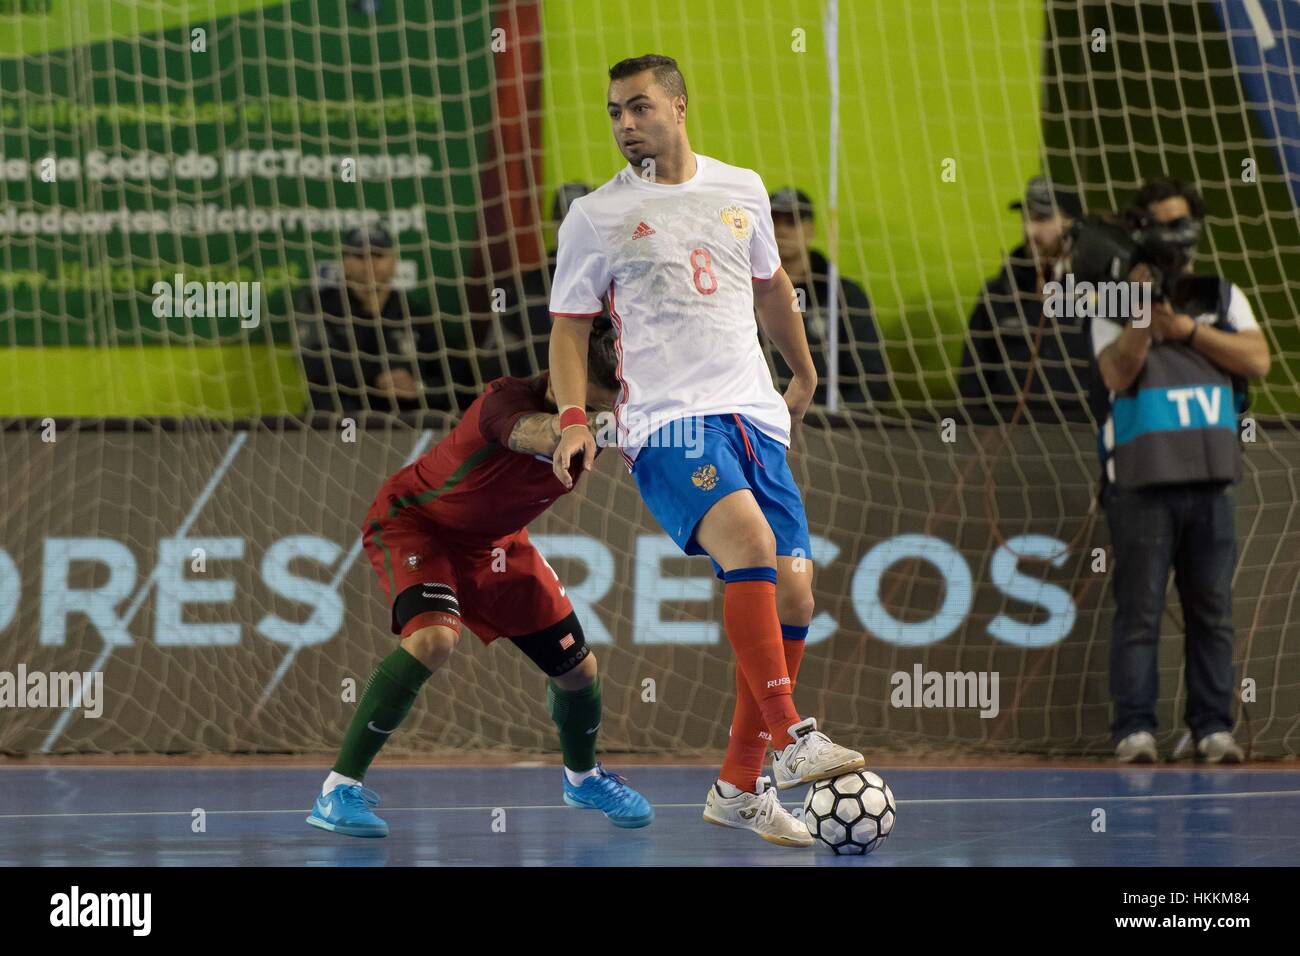 Seixal, Portugal. 29th January 2017. FUTSAL: PORTUGAL x RUSSIA  - Eder Lima (R) and João Matos (L) in action during friendly futsal match between Portugal and Russia, in Seixal, Portugal. Credit: Bruno de Carvalho/Alamy Live News Stock Photo